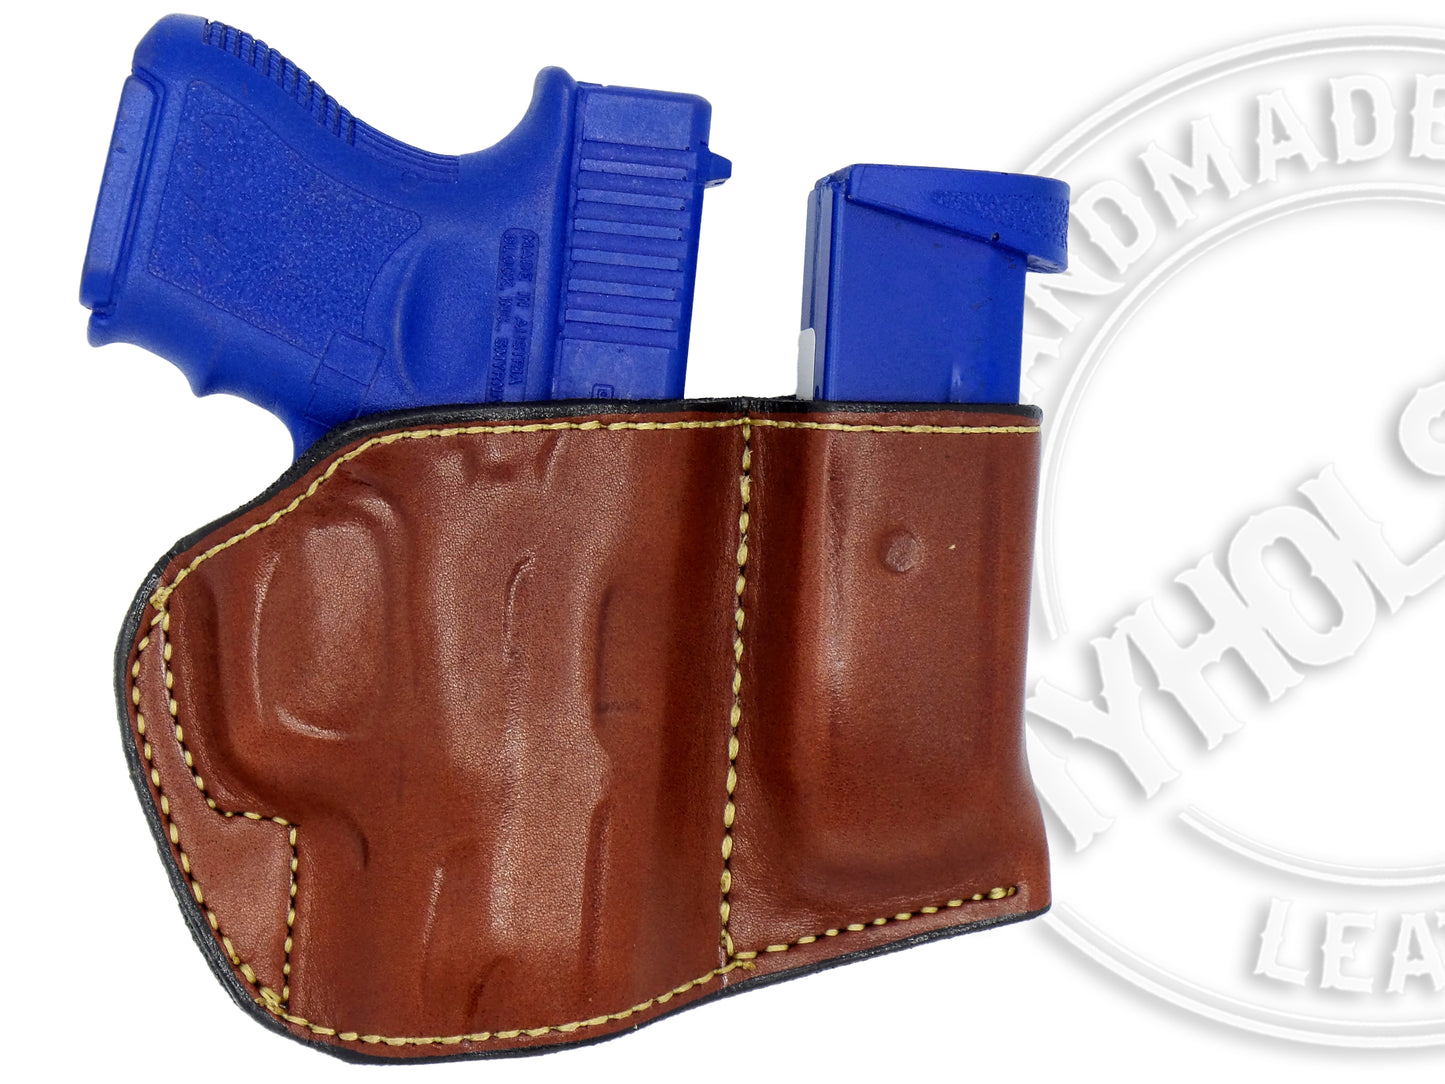 GLOCK 48 Holster and Mag Pouch Combo - OWB Leather Belt Holster